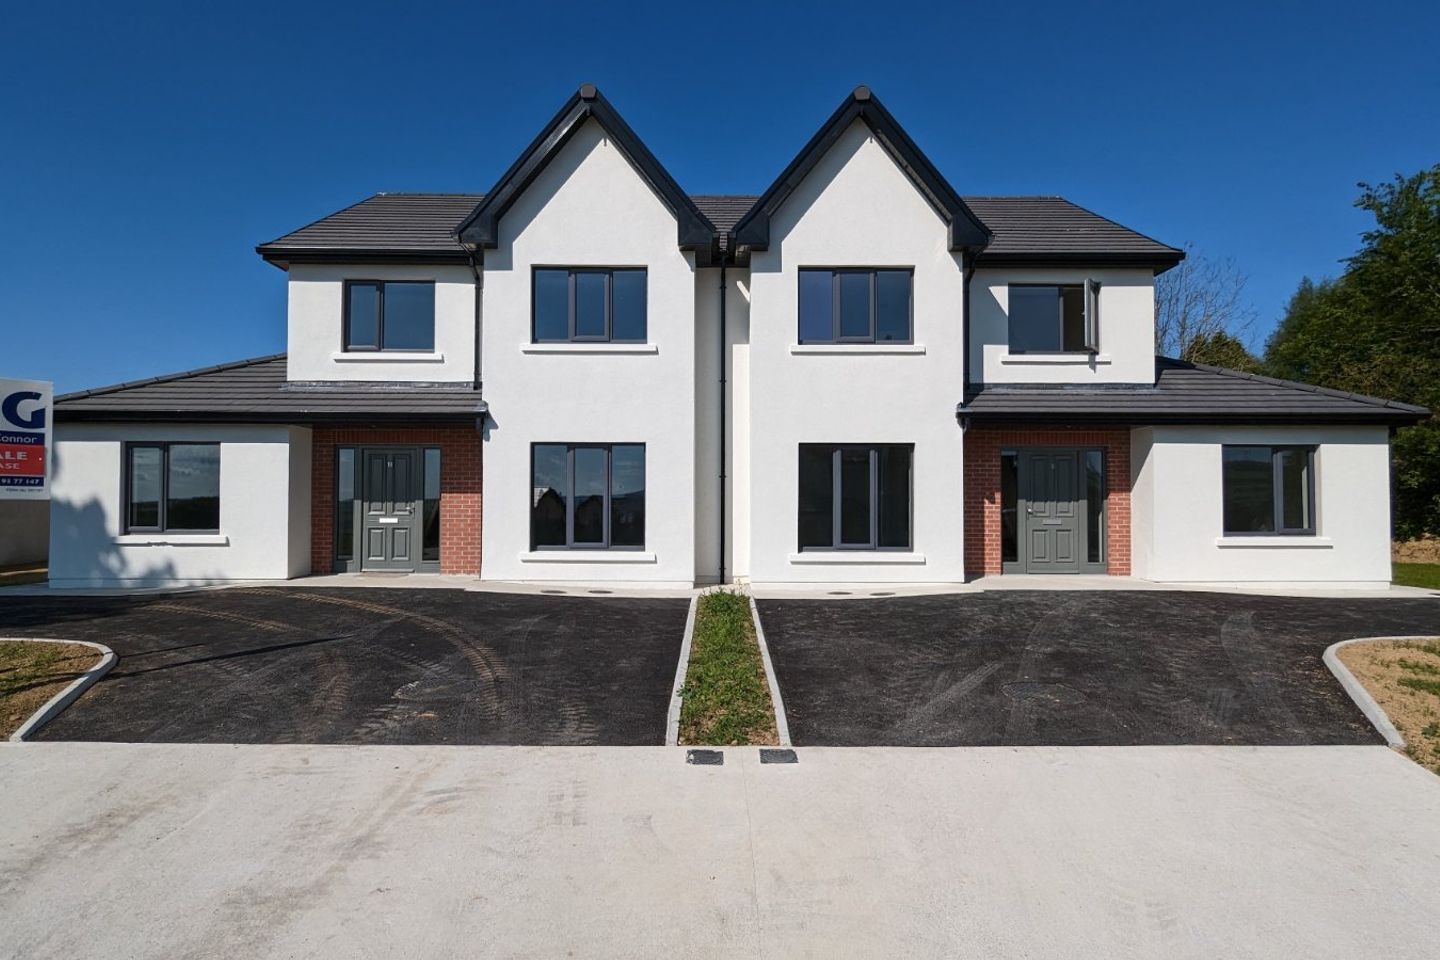 4 Bed A Rated Semi Detached Home, 4 Bed A Rated Semi Detached Home, Old Forest, Final Stage Of Development, Bunclody, Co. Wexford, Y21CX9R